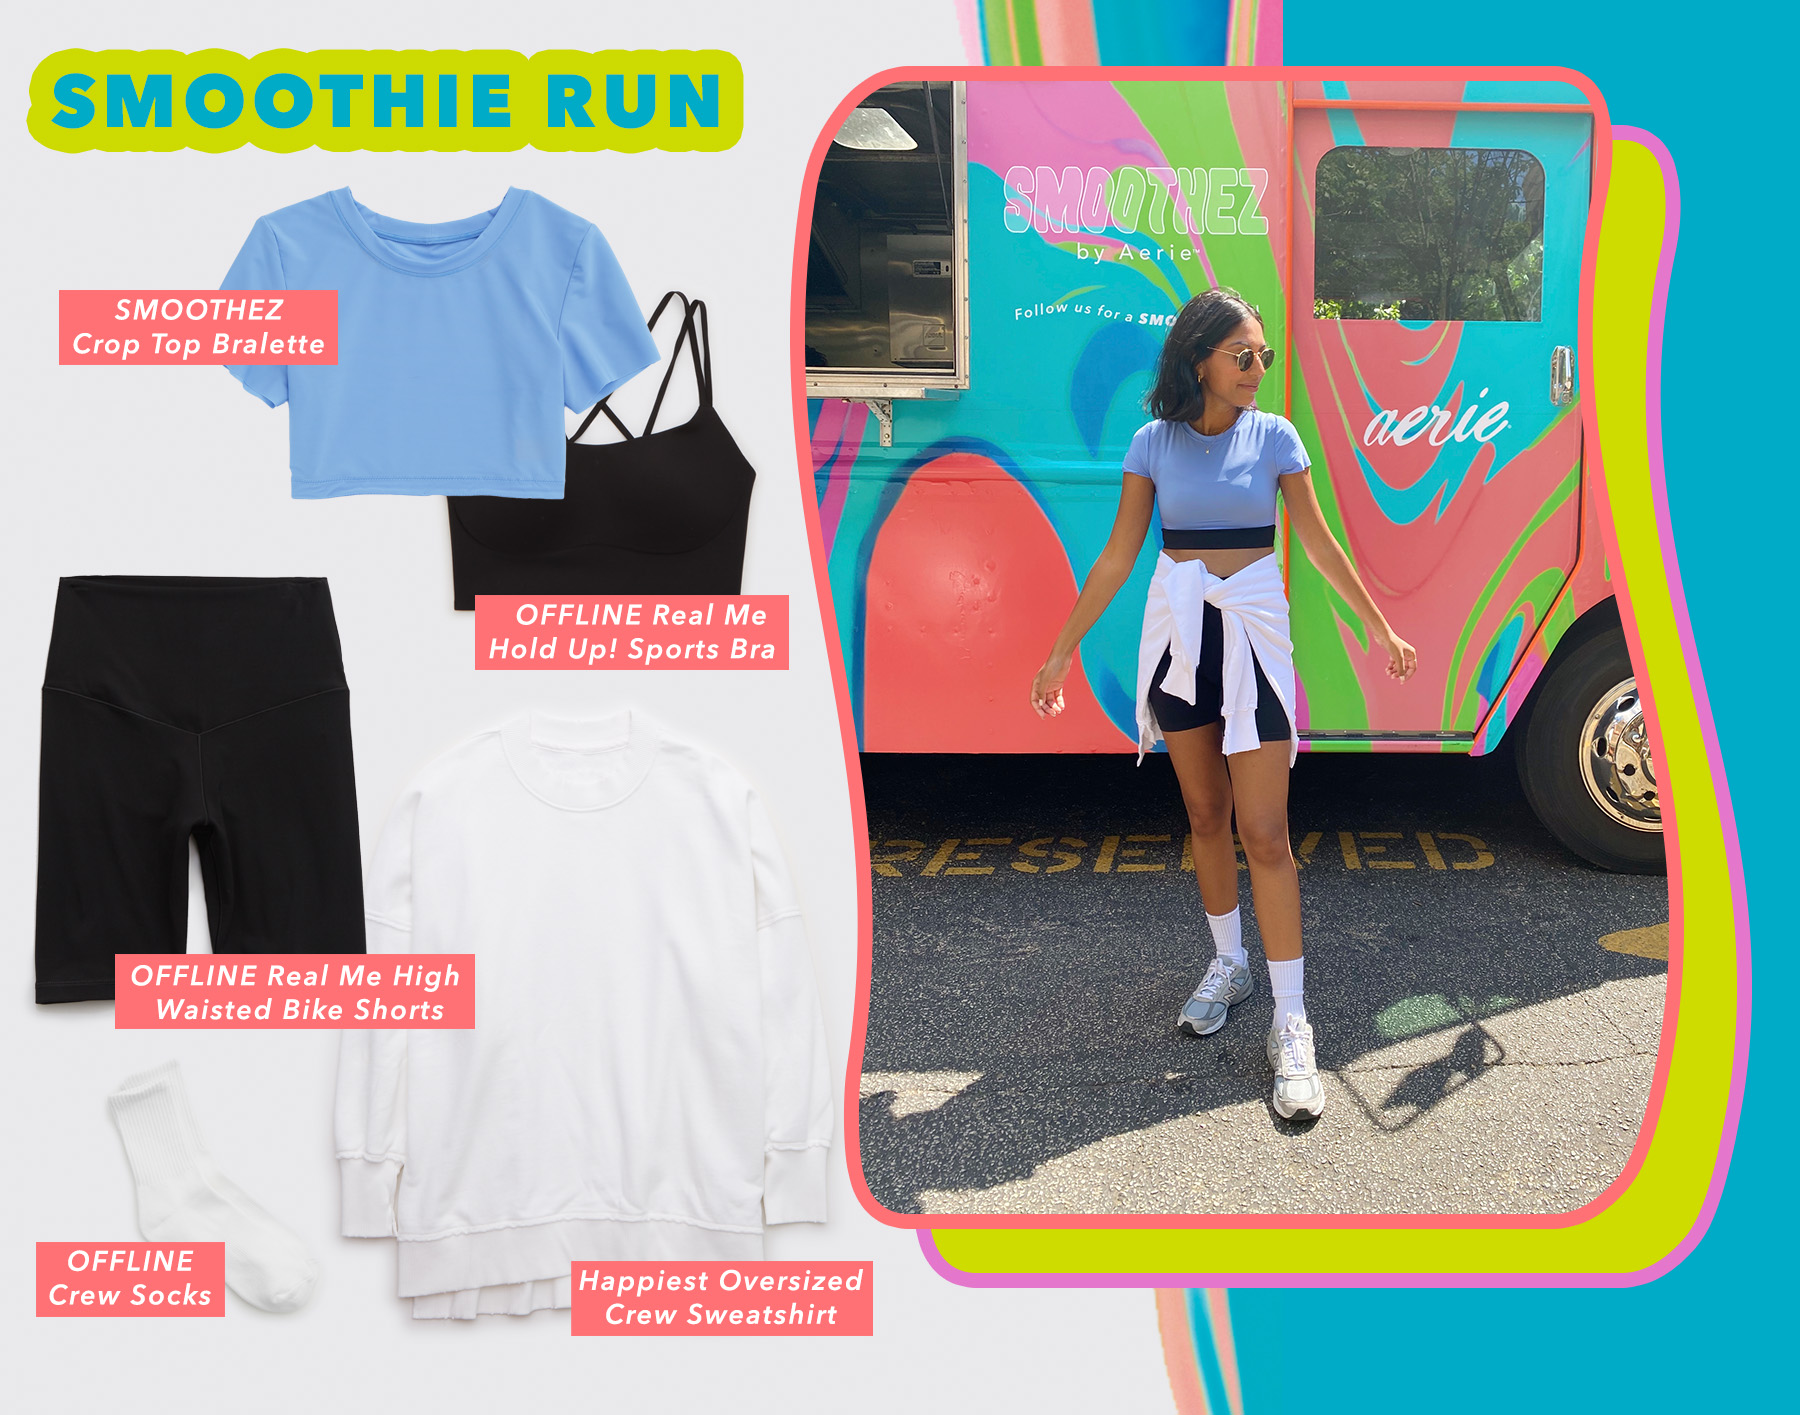 SMOOTHEZ IRL: How to Wear the Smoothez Crop Top Two Ways